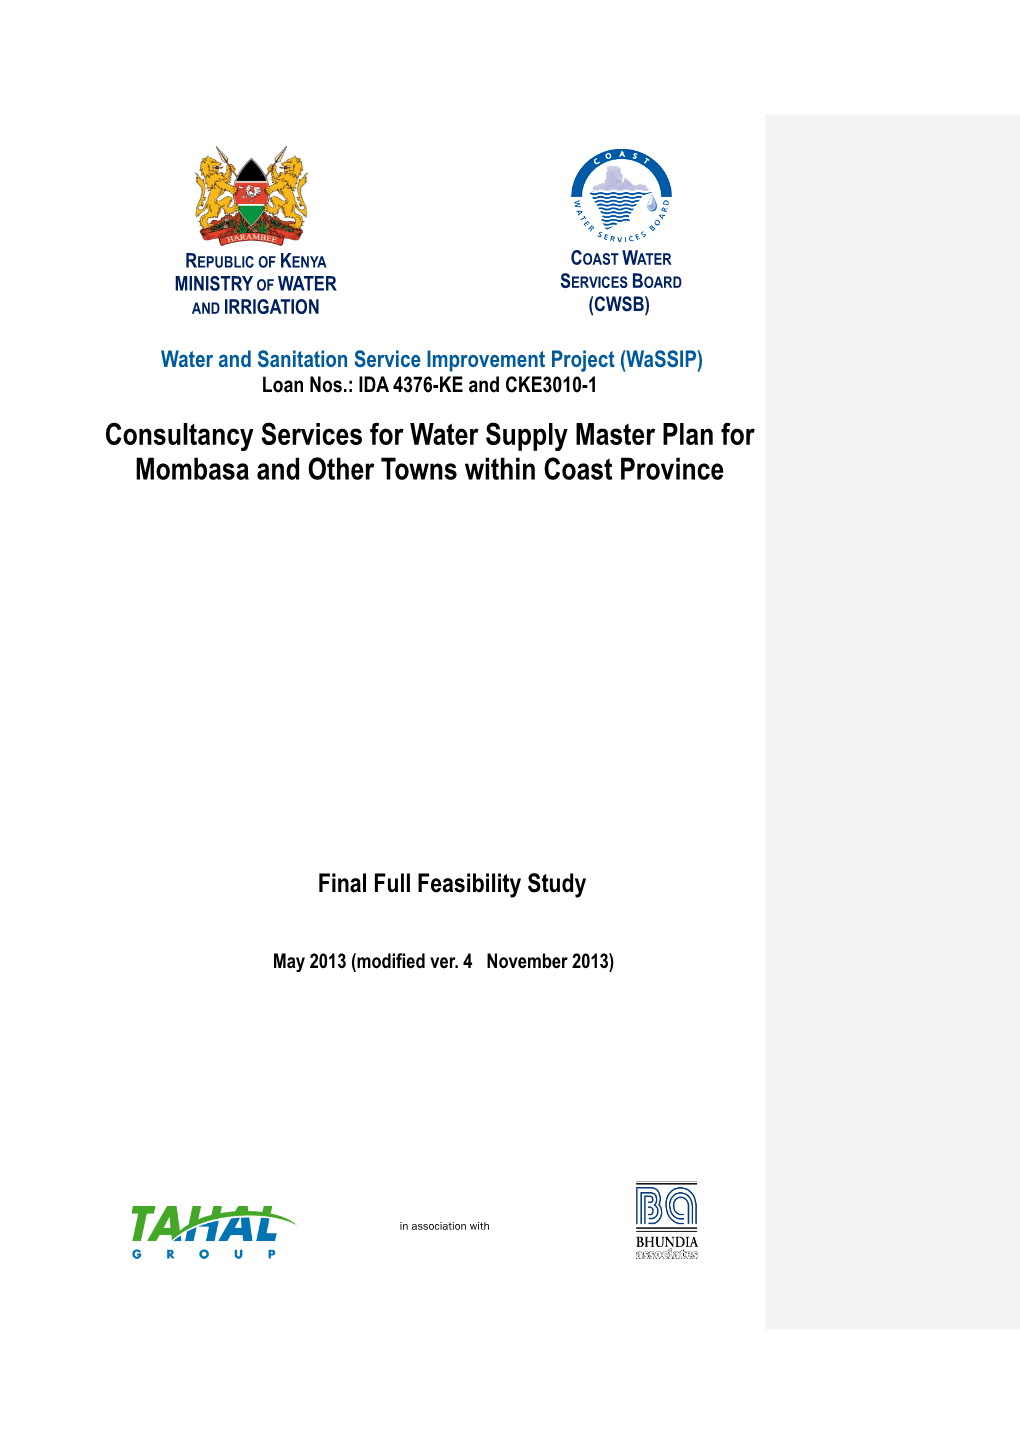 Consultancy Services for Water Supply Master Plan for Mombasa and Other Towns Within Coast Province